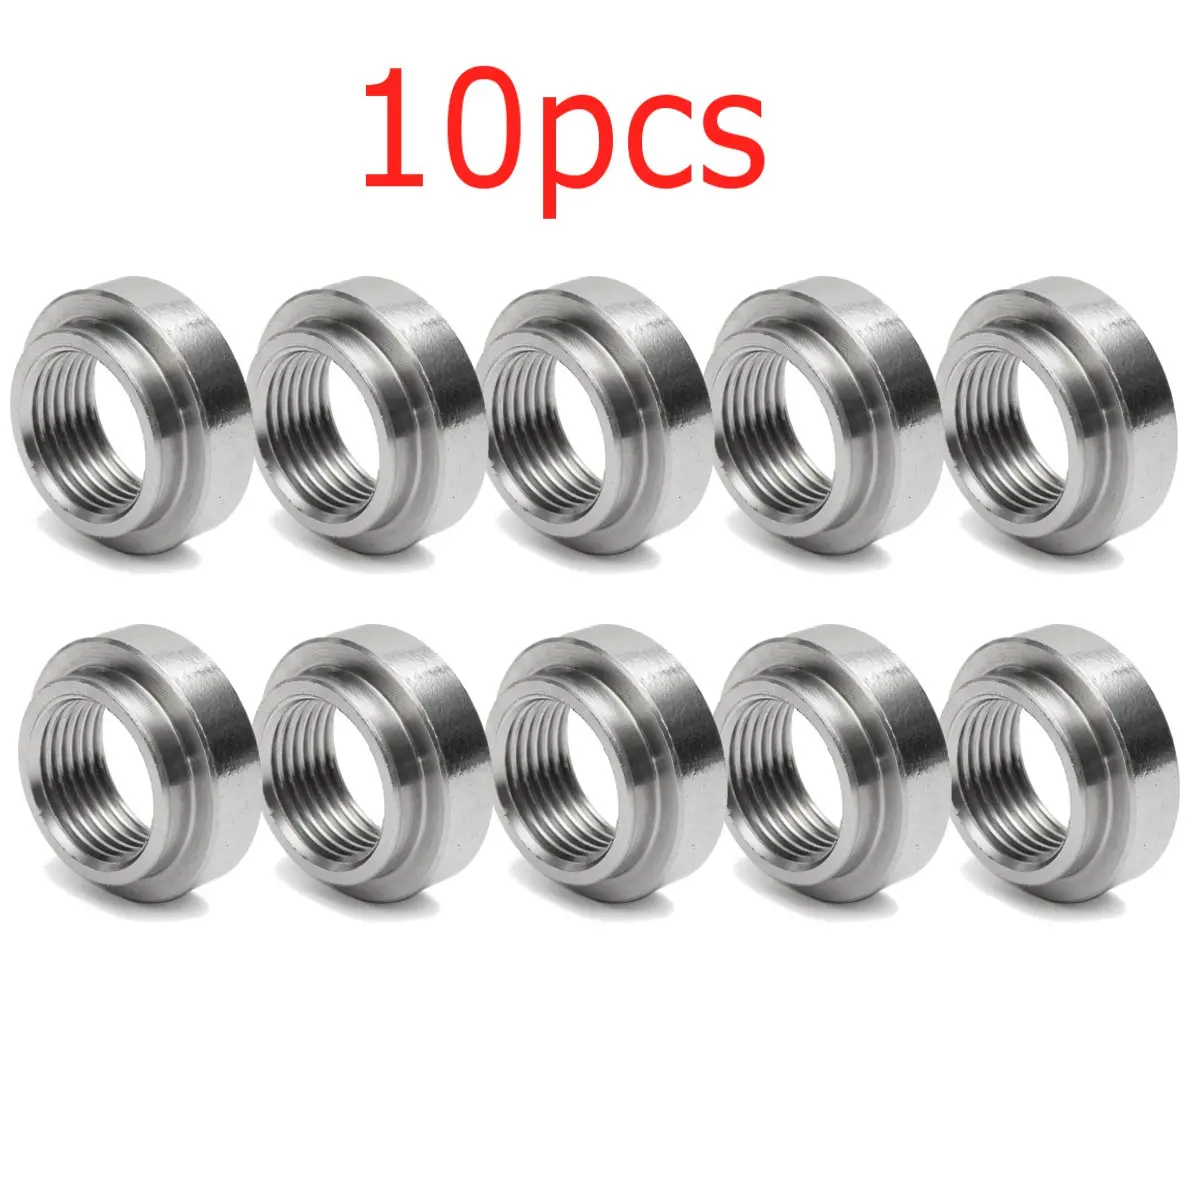 5/10pcs M18x1.5mm Exhaust Lambda Nuts 430 Stainless Steel Exhaust Pipe Base Heat-resisting Oxygen Sensor Nuts Universal